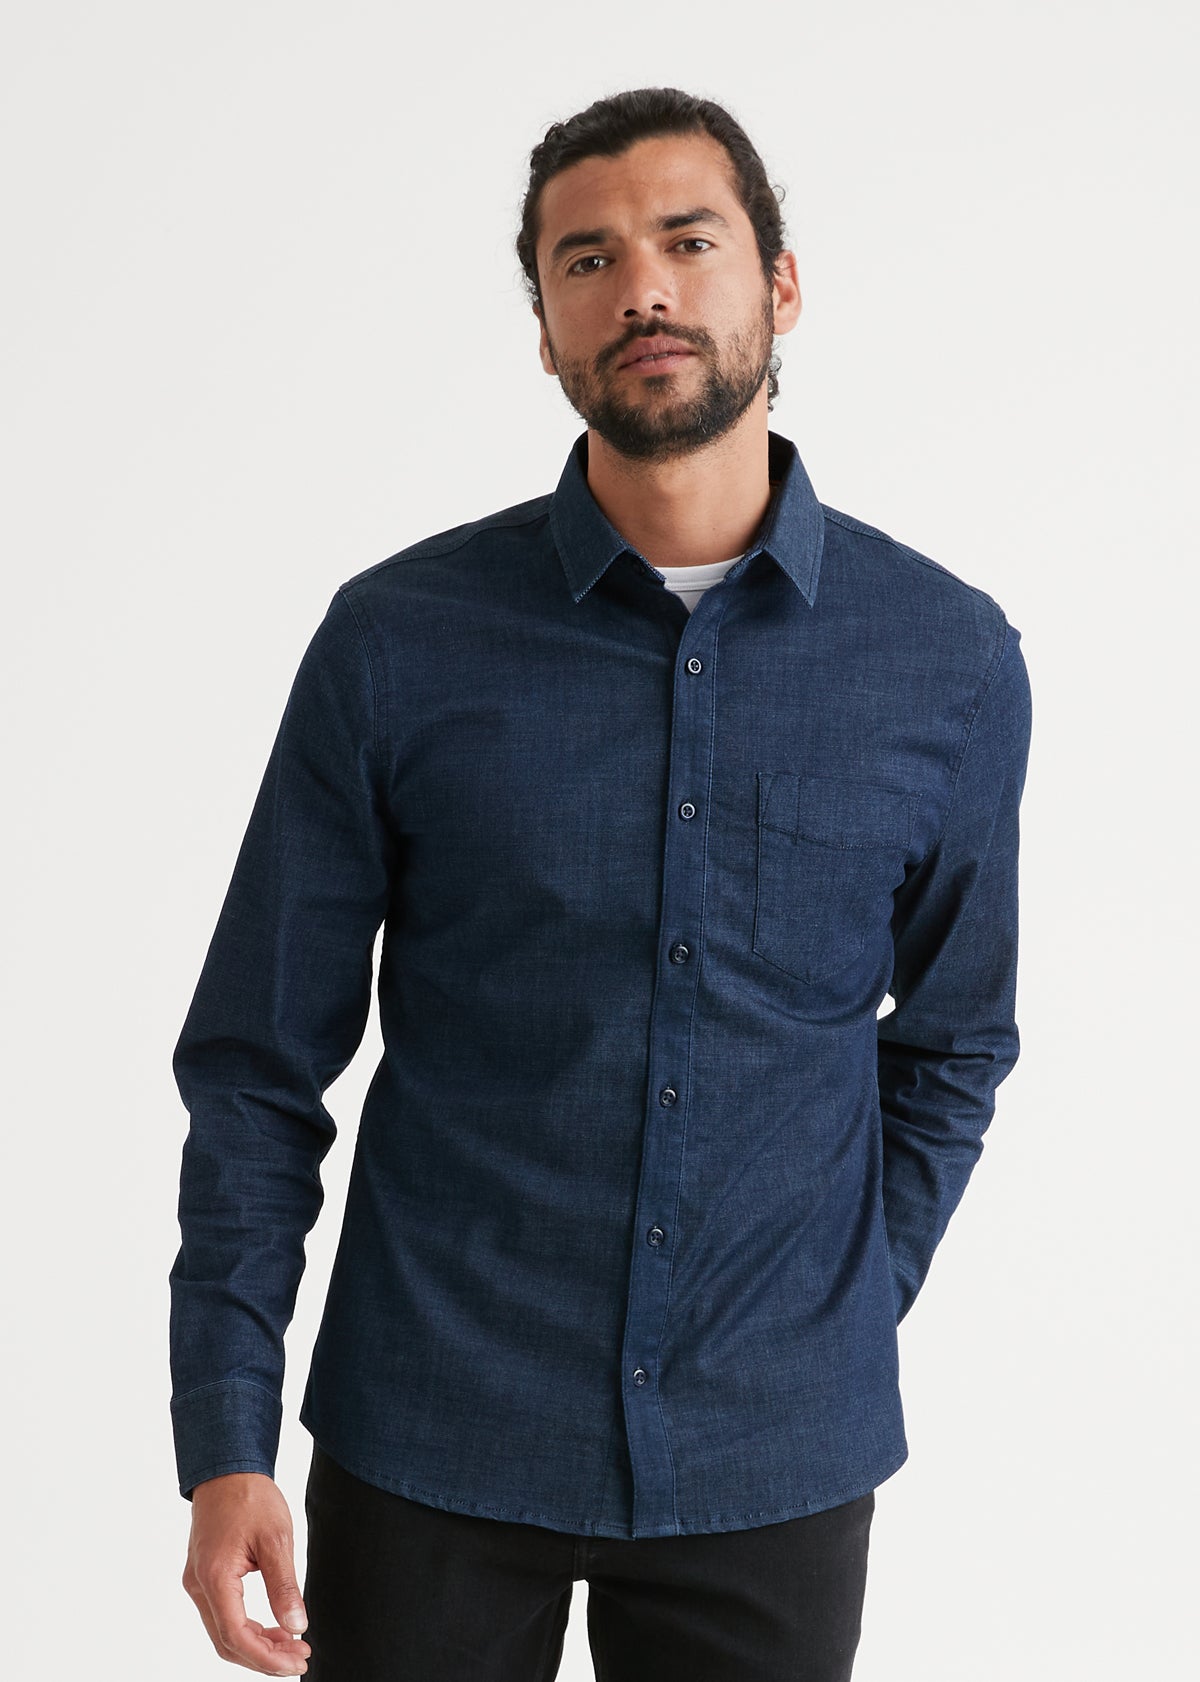 ATOFY Men's Casual Denim Shirt Slim Fit Long Sleeve Button Down Shirt  Distressed Washed Denim with Chest Pockets, #01-black, Medium : Amazon.in:  Clothing & Accessories